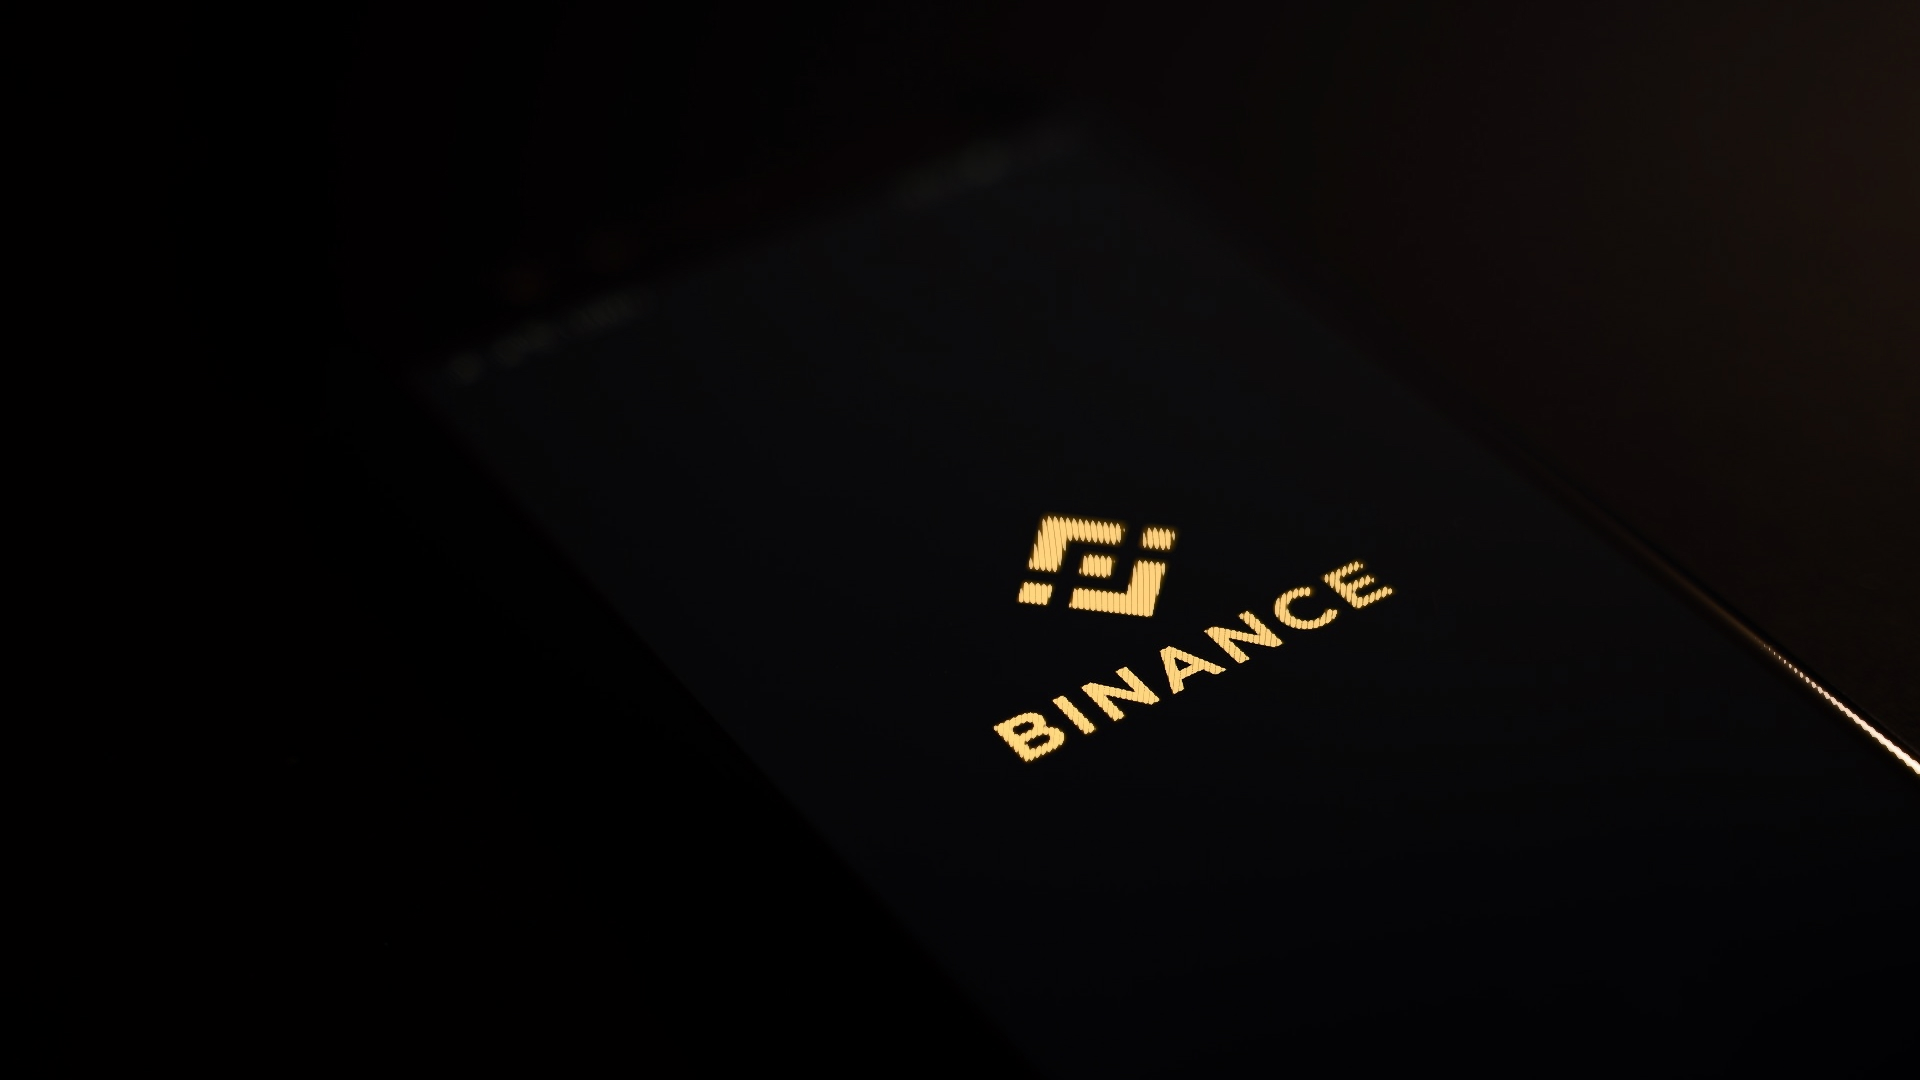 Nearly 200 Binance Accounts Seized by Israel Since 2021: Reuters